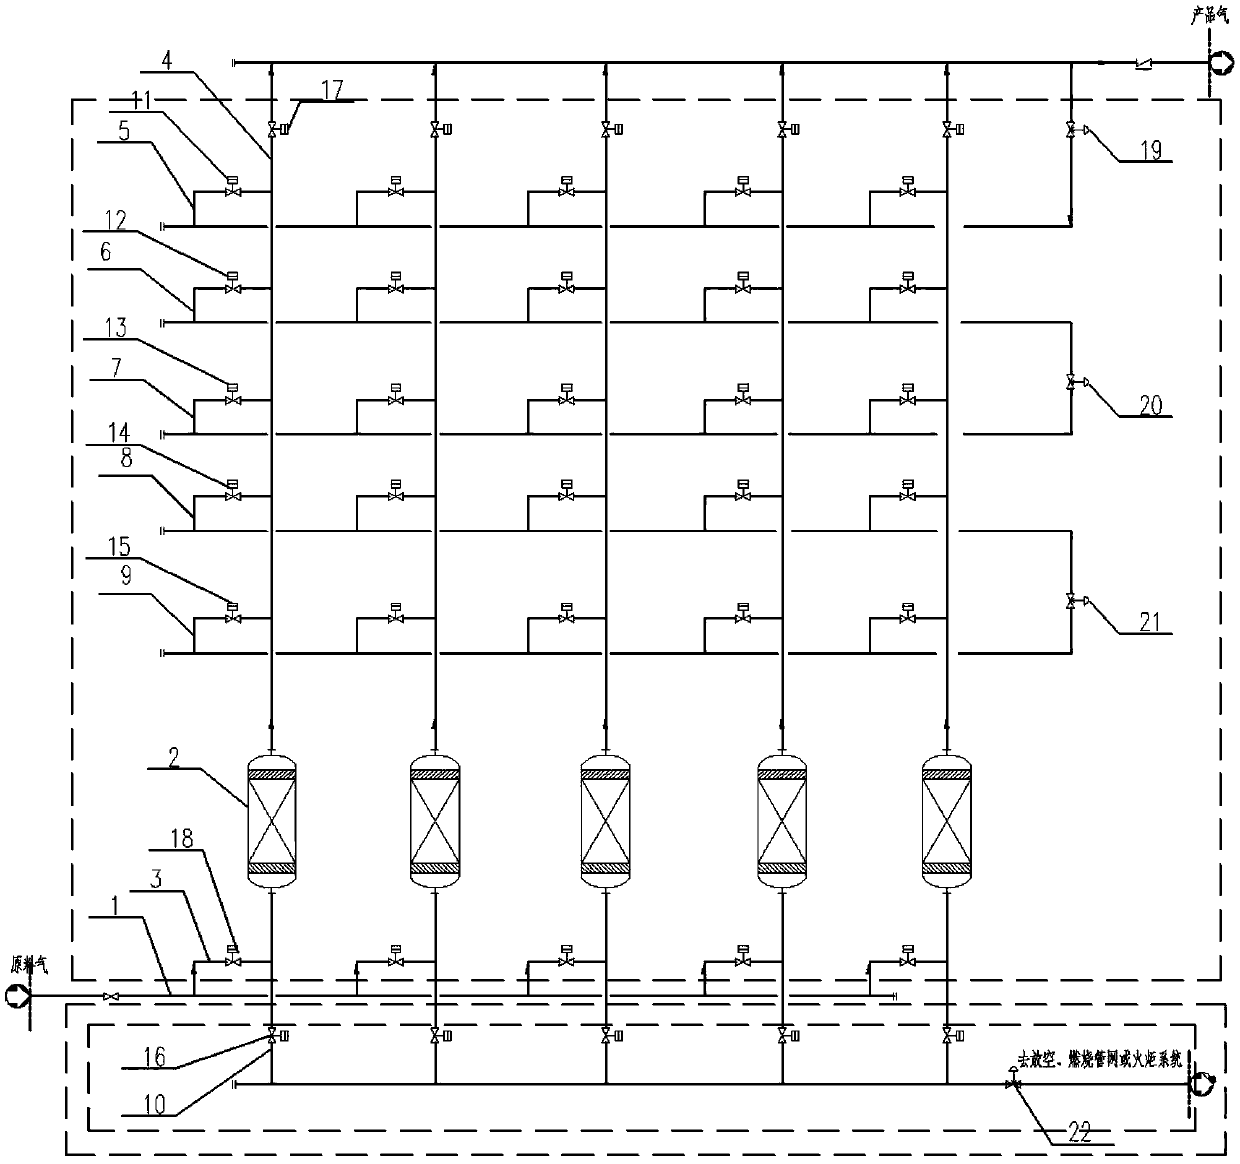 A pressure swing adsorption method for pressure change linkage control in cycle operation